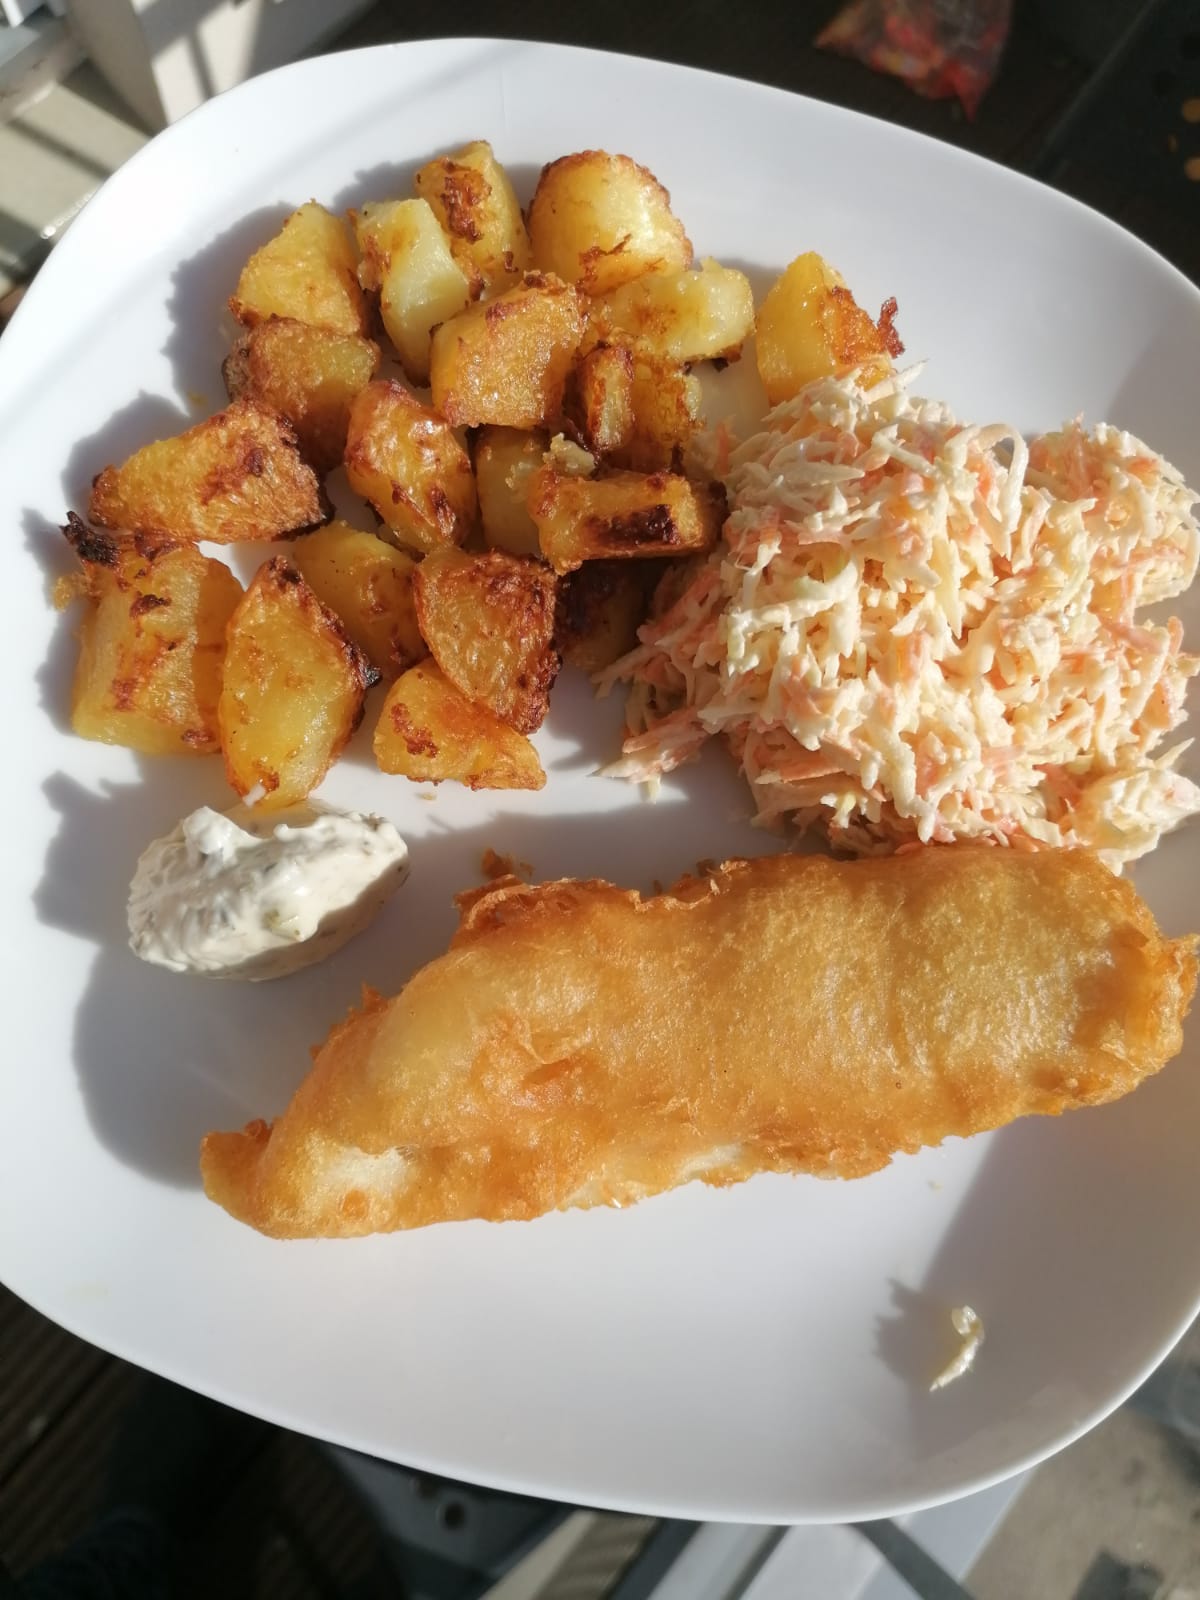 Receita Fish and Chips